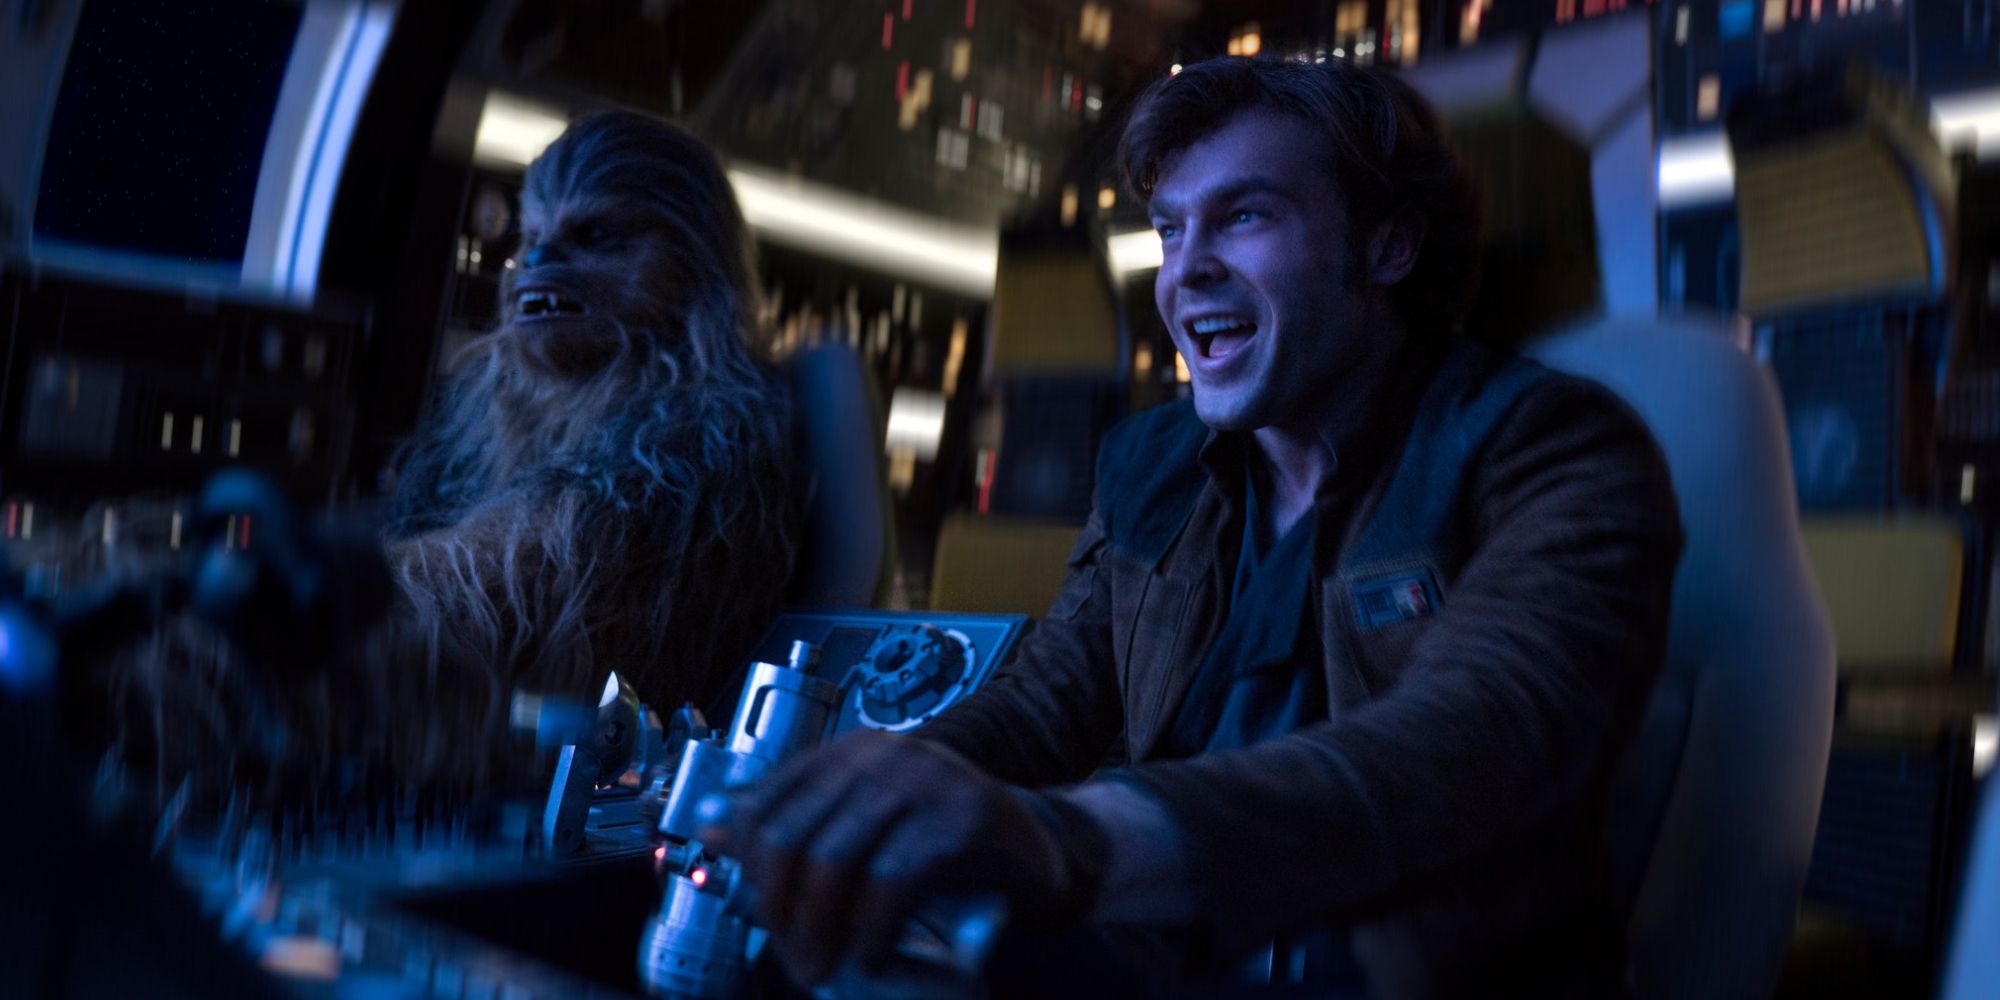 Han Solo (Alden Ehrenreich) and Chewbacca in the cockpit of the Millennium Falcon in 'Solo: A Star Wars Story' (2018)